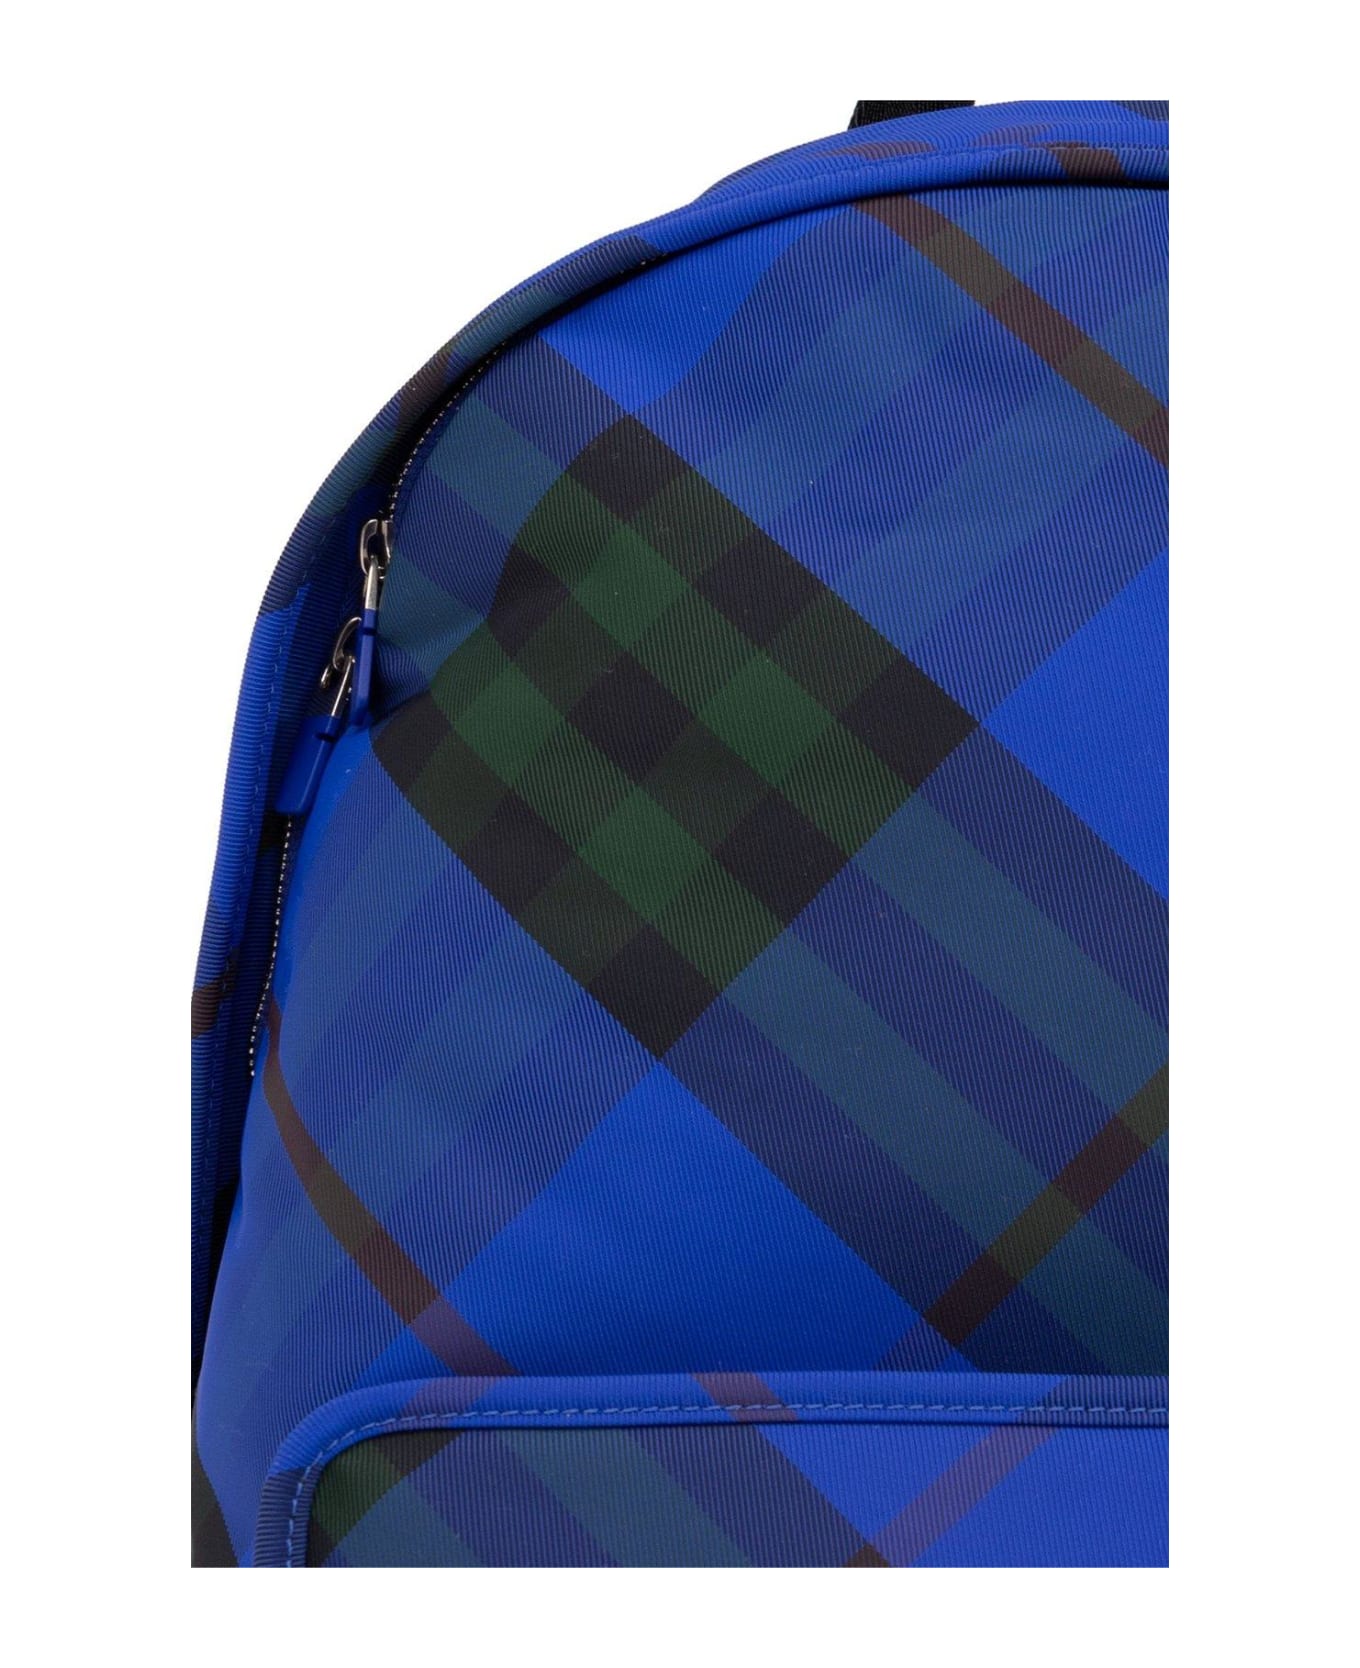 Burberry Shield Vintage Check-printed Zipped Backpack - Knight